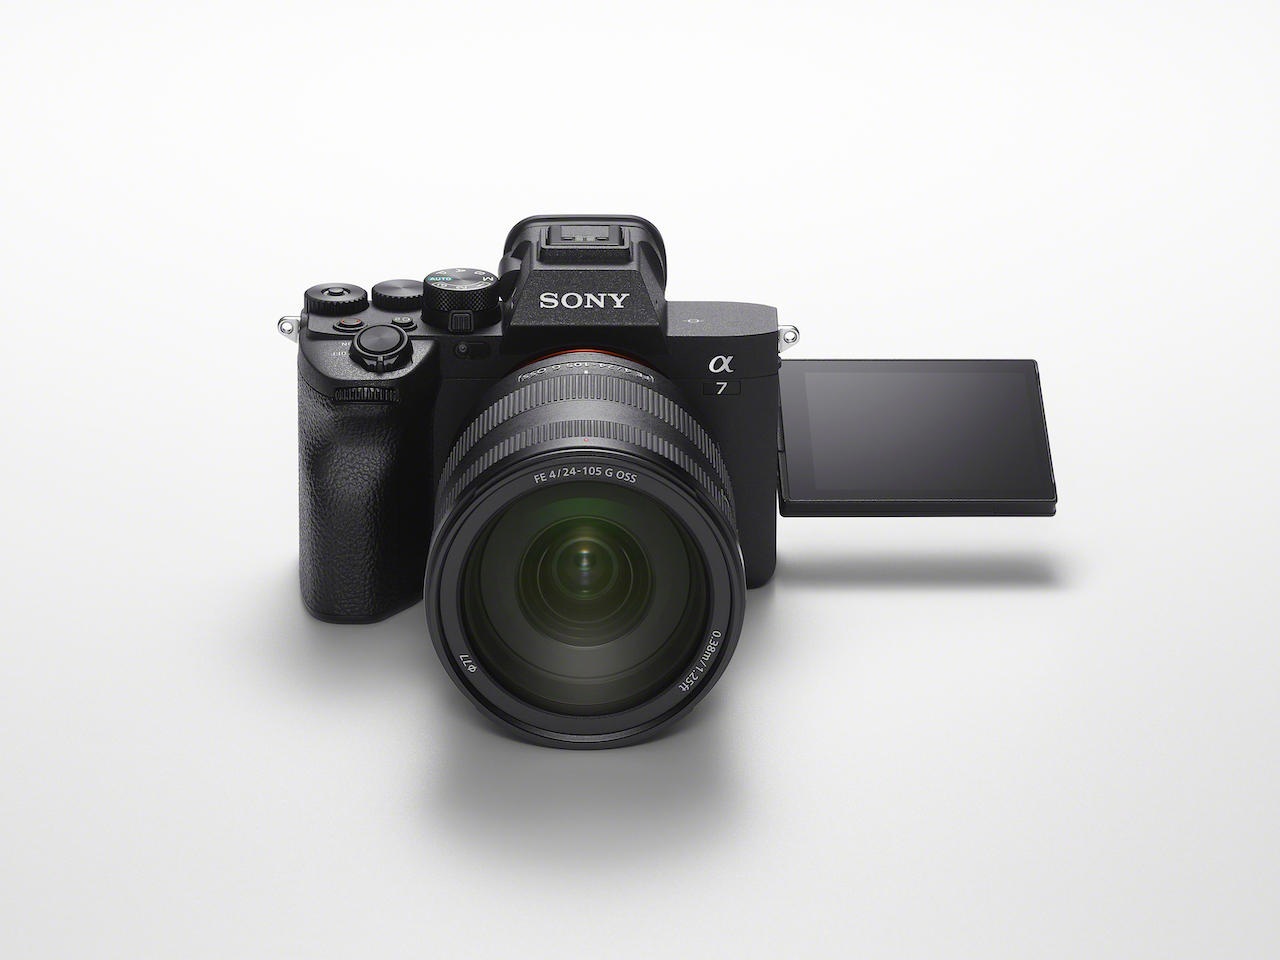 Sony has released its new Alpha 7 IV interchangable-lens camera, which features a newly developed 33- megapixel full-frame image sensor.